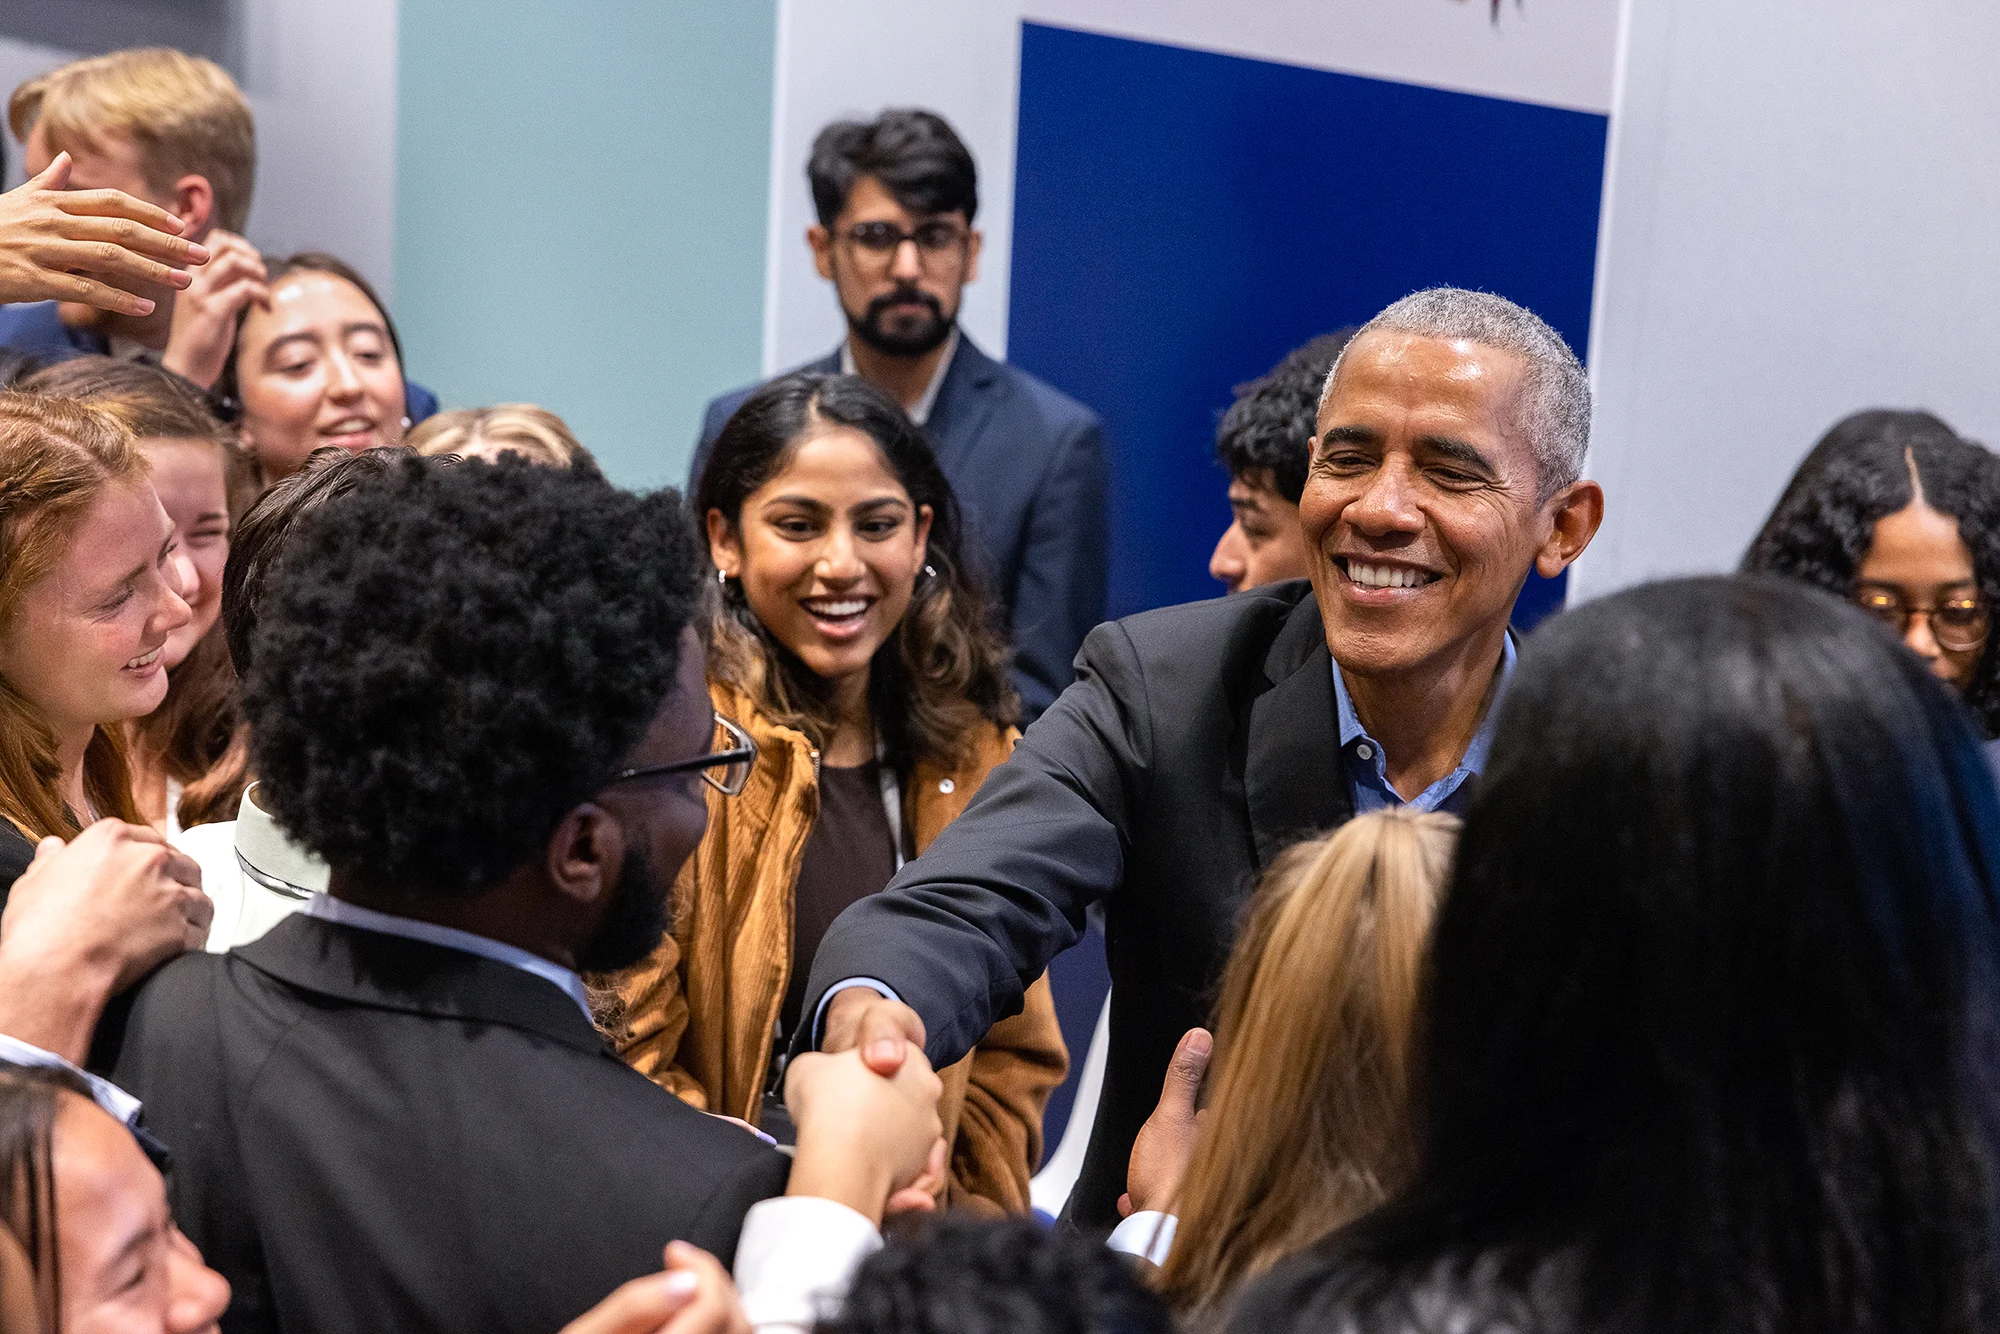 President Obama shakes hands over a crowd of young people with various skin tones. 